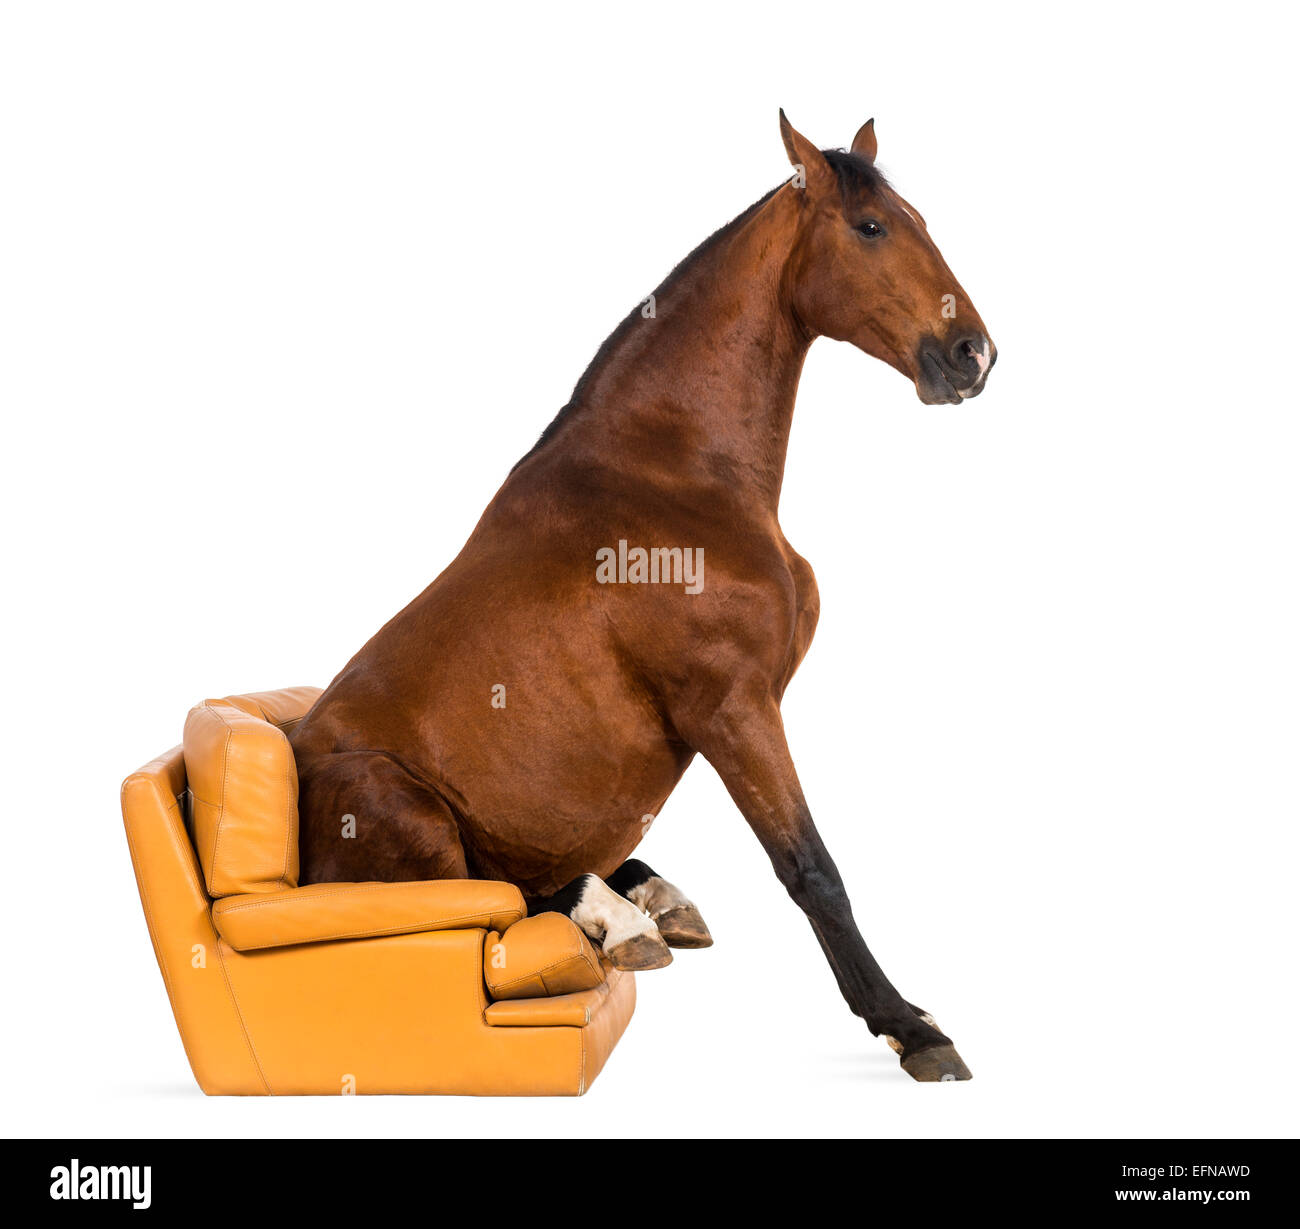 Andalusian horse sitting on an armchair against white background Stock Photo